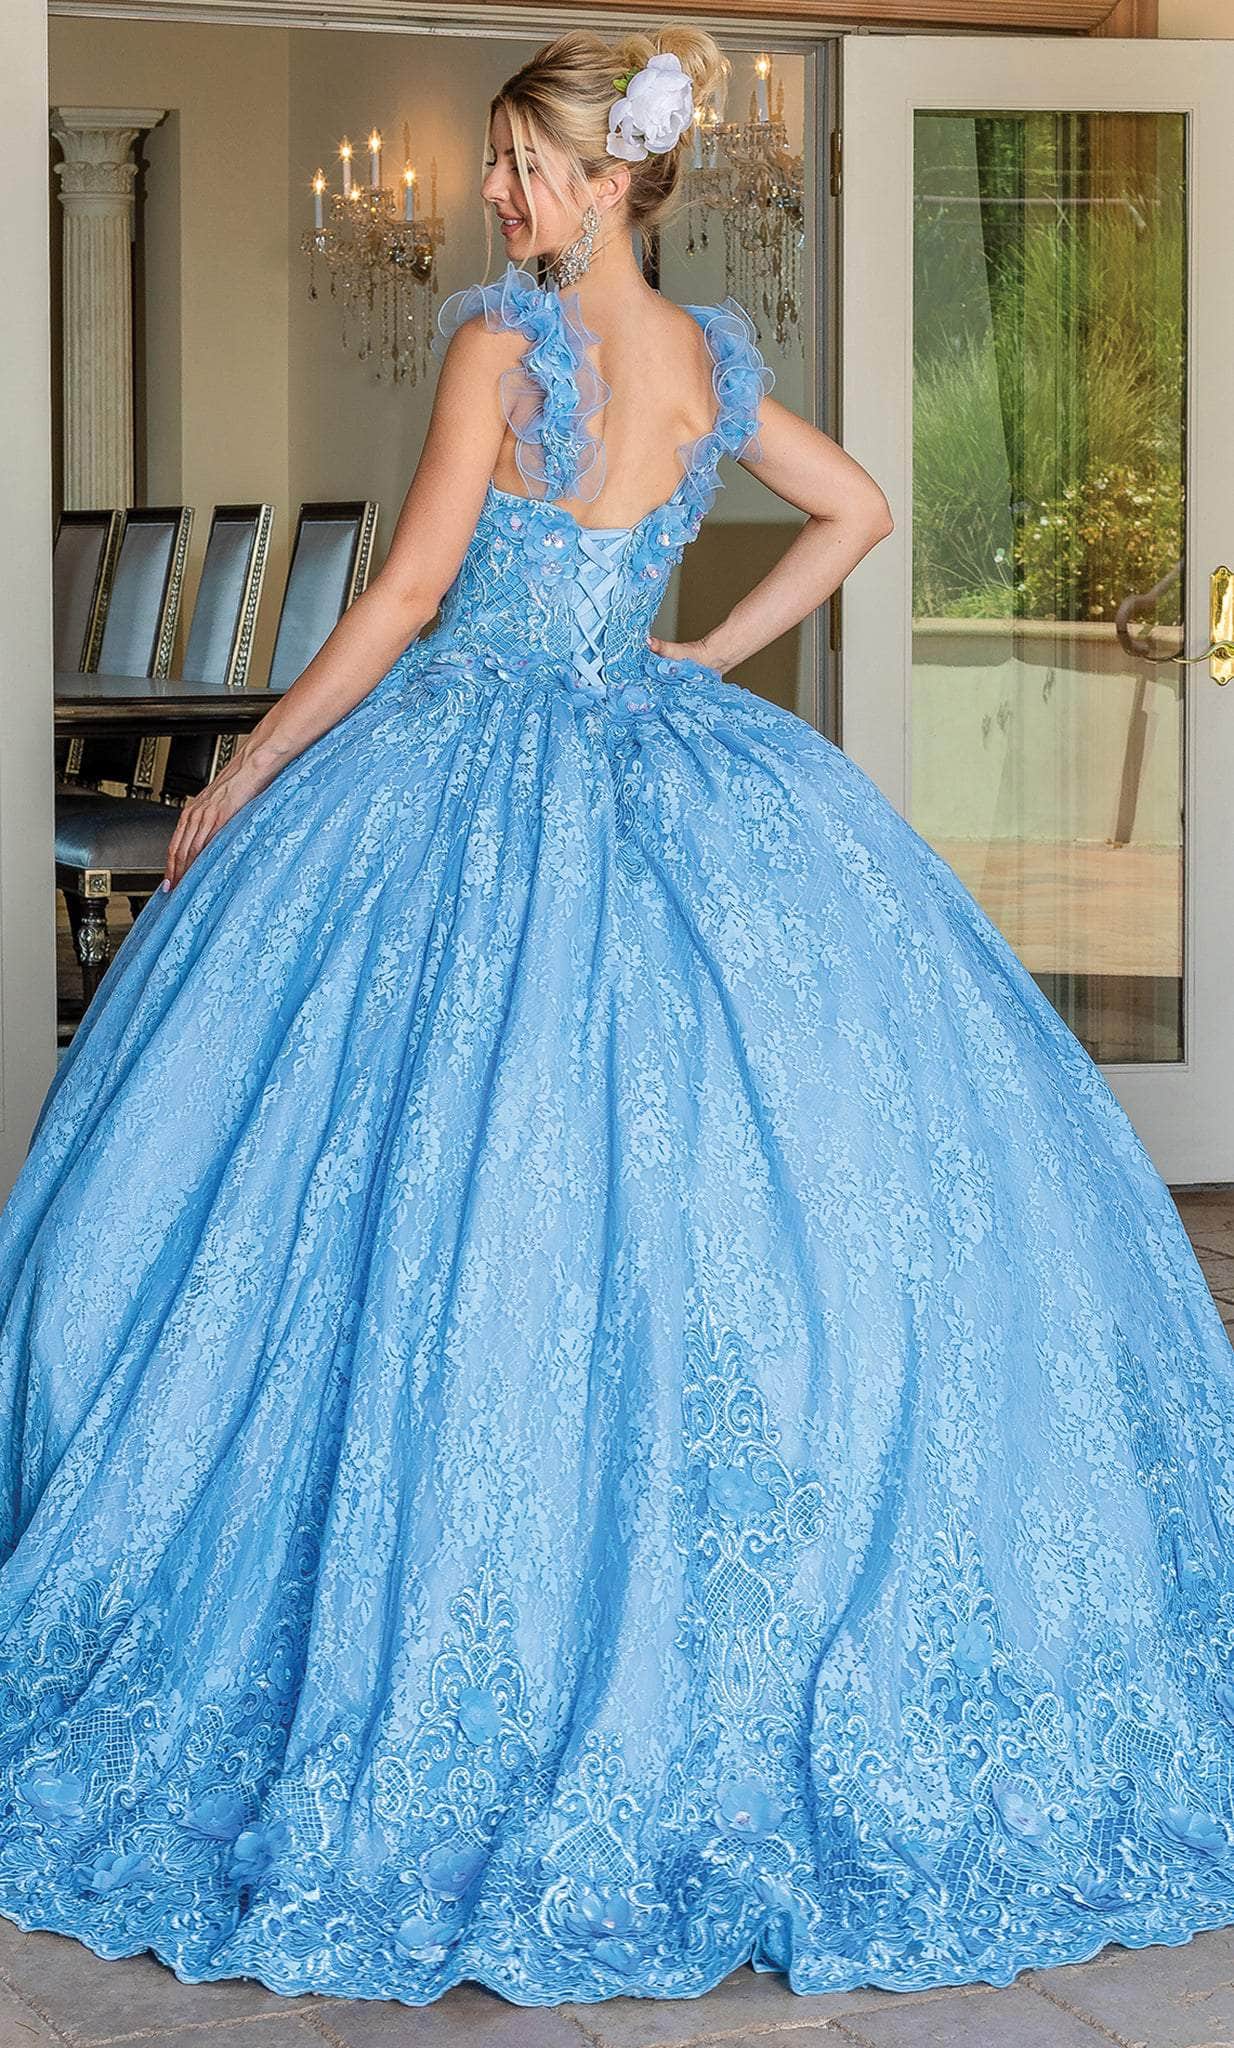 Dancing Queen 1721 - 3D Floral Embellished Sleeveless Ballgown Ball Gowns